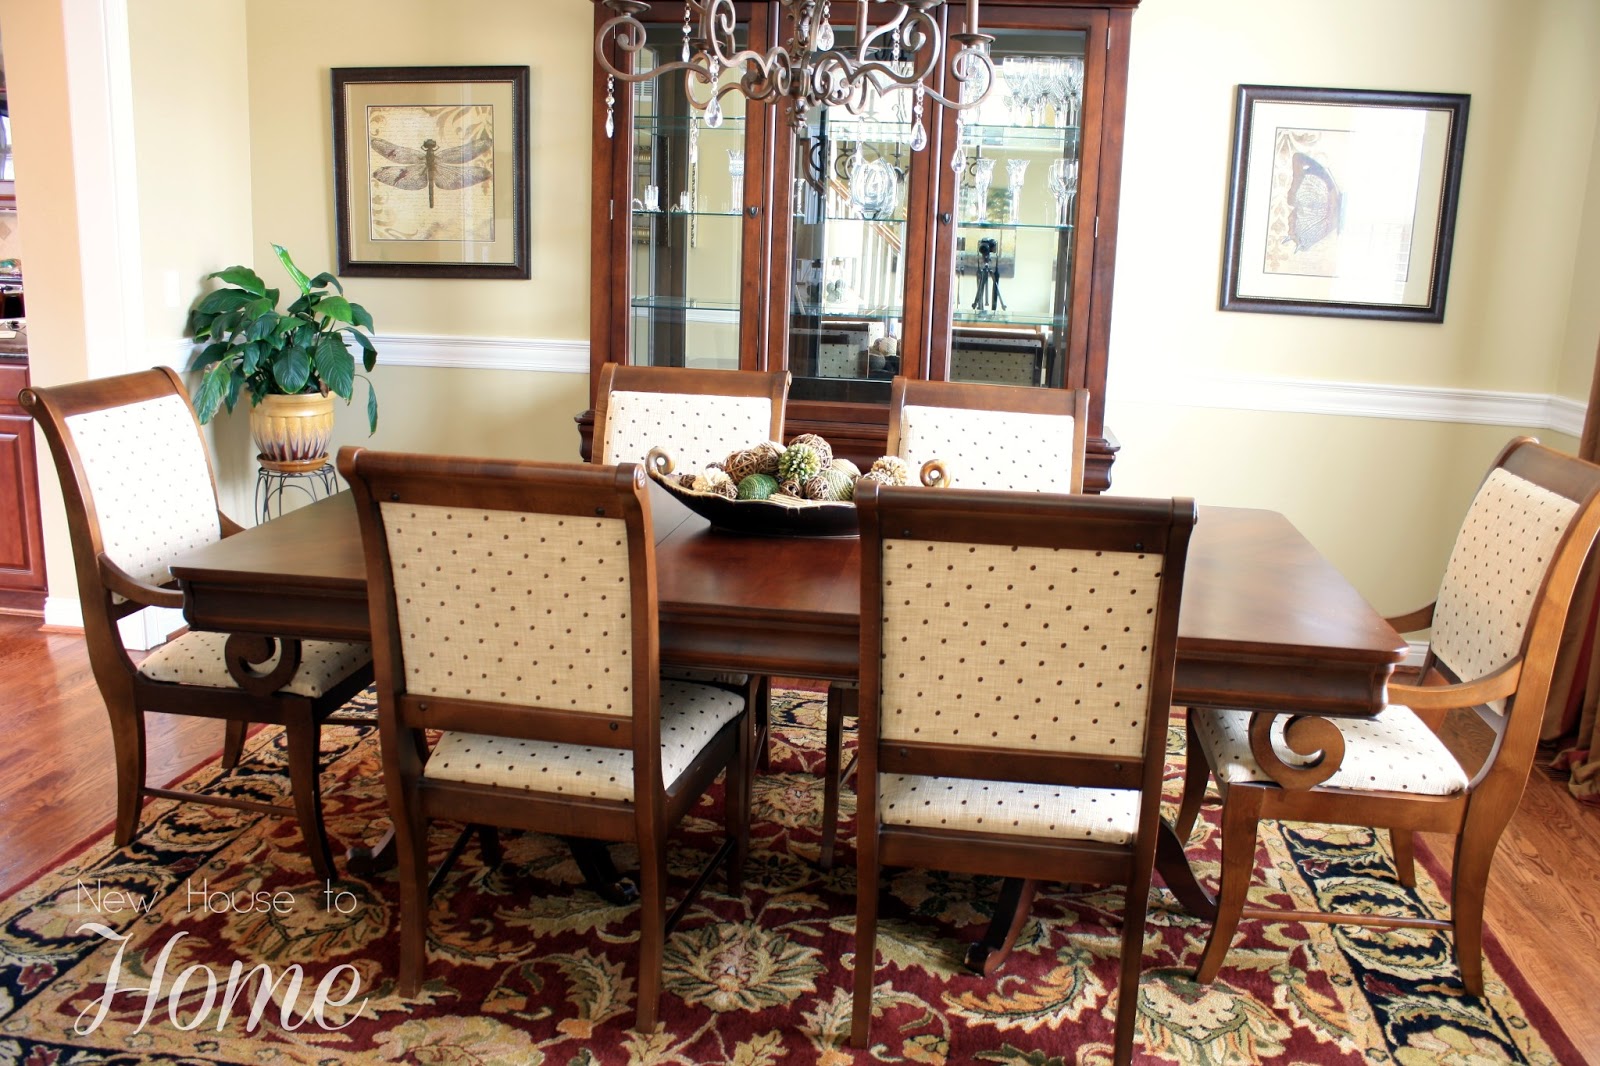 New House to Home: How I Recovered My Dining Room Chairs